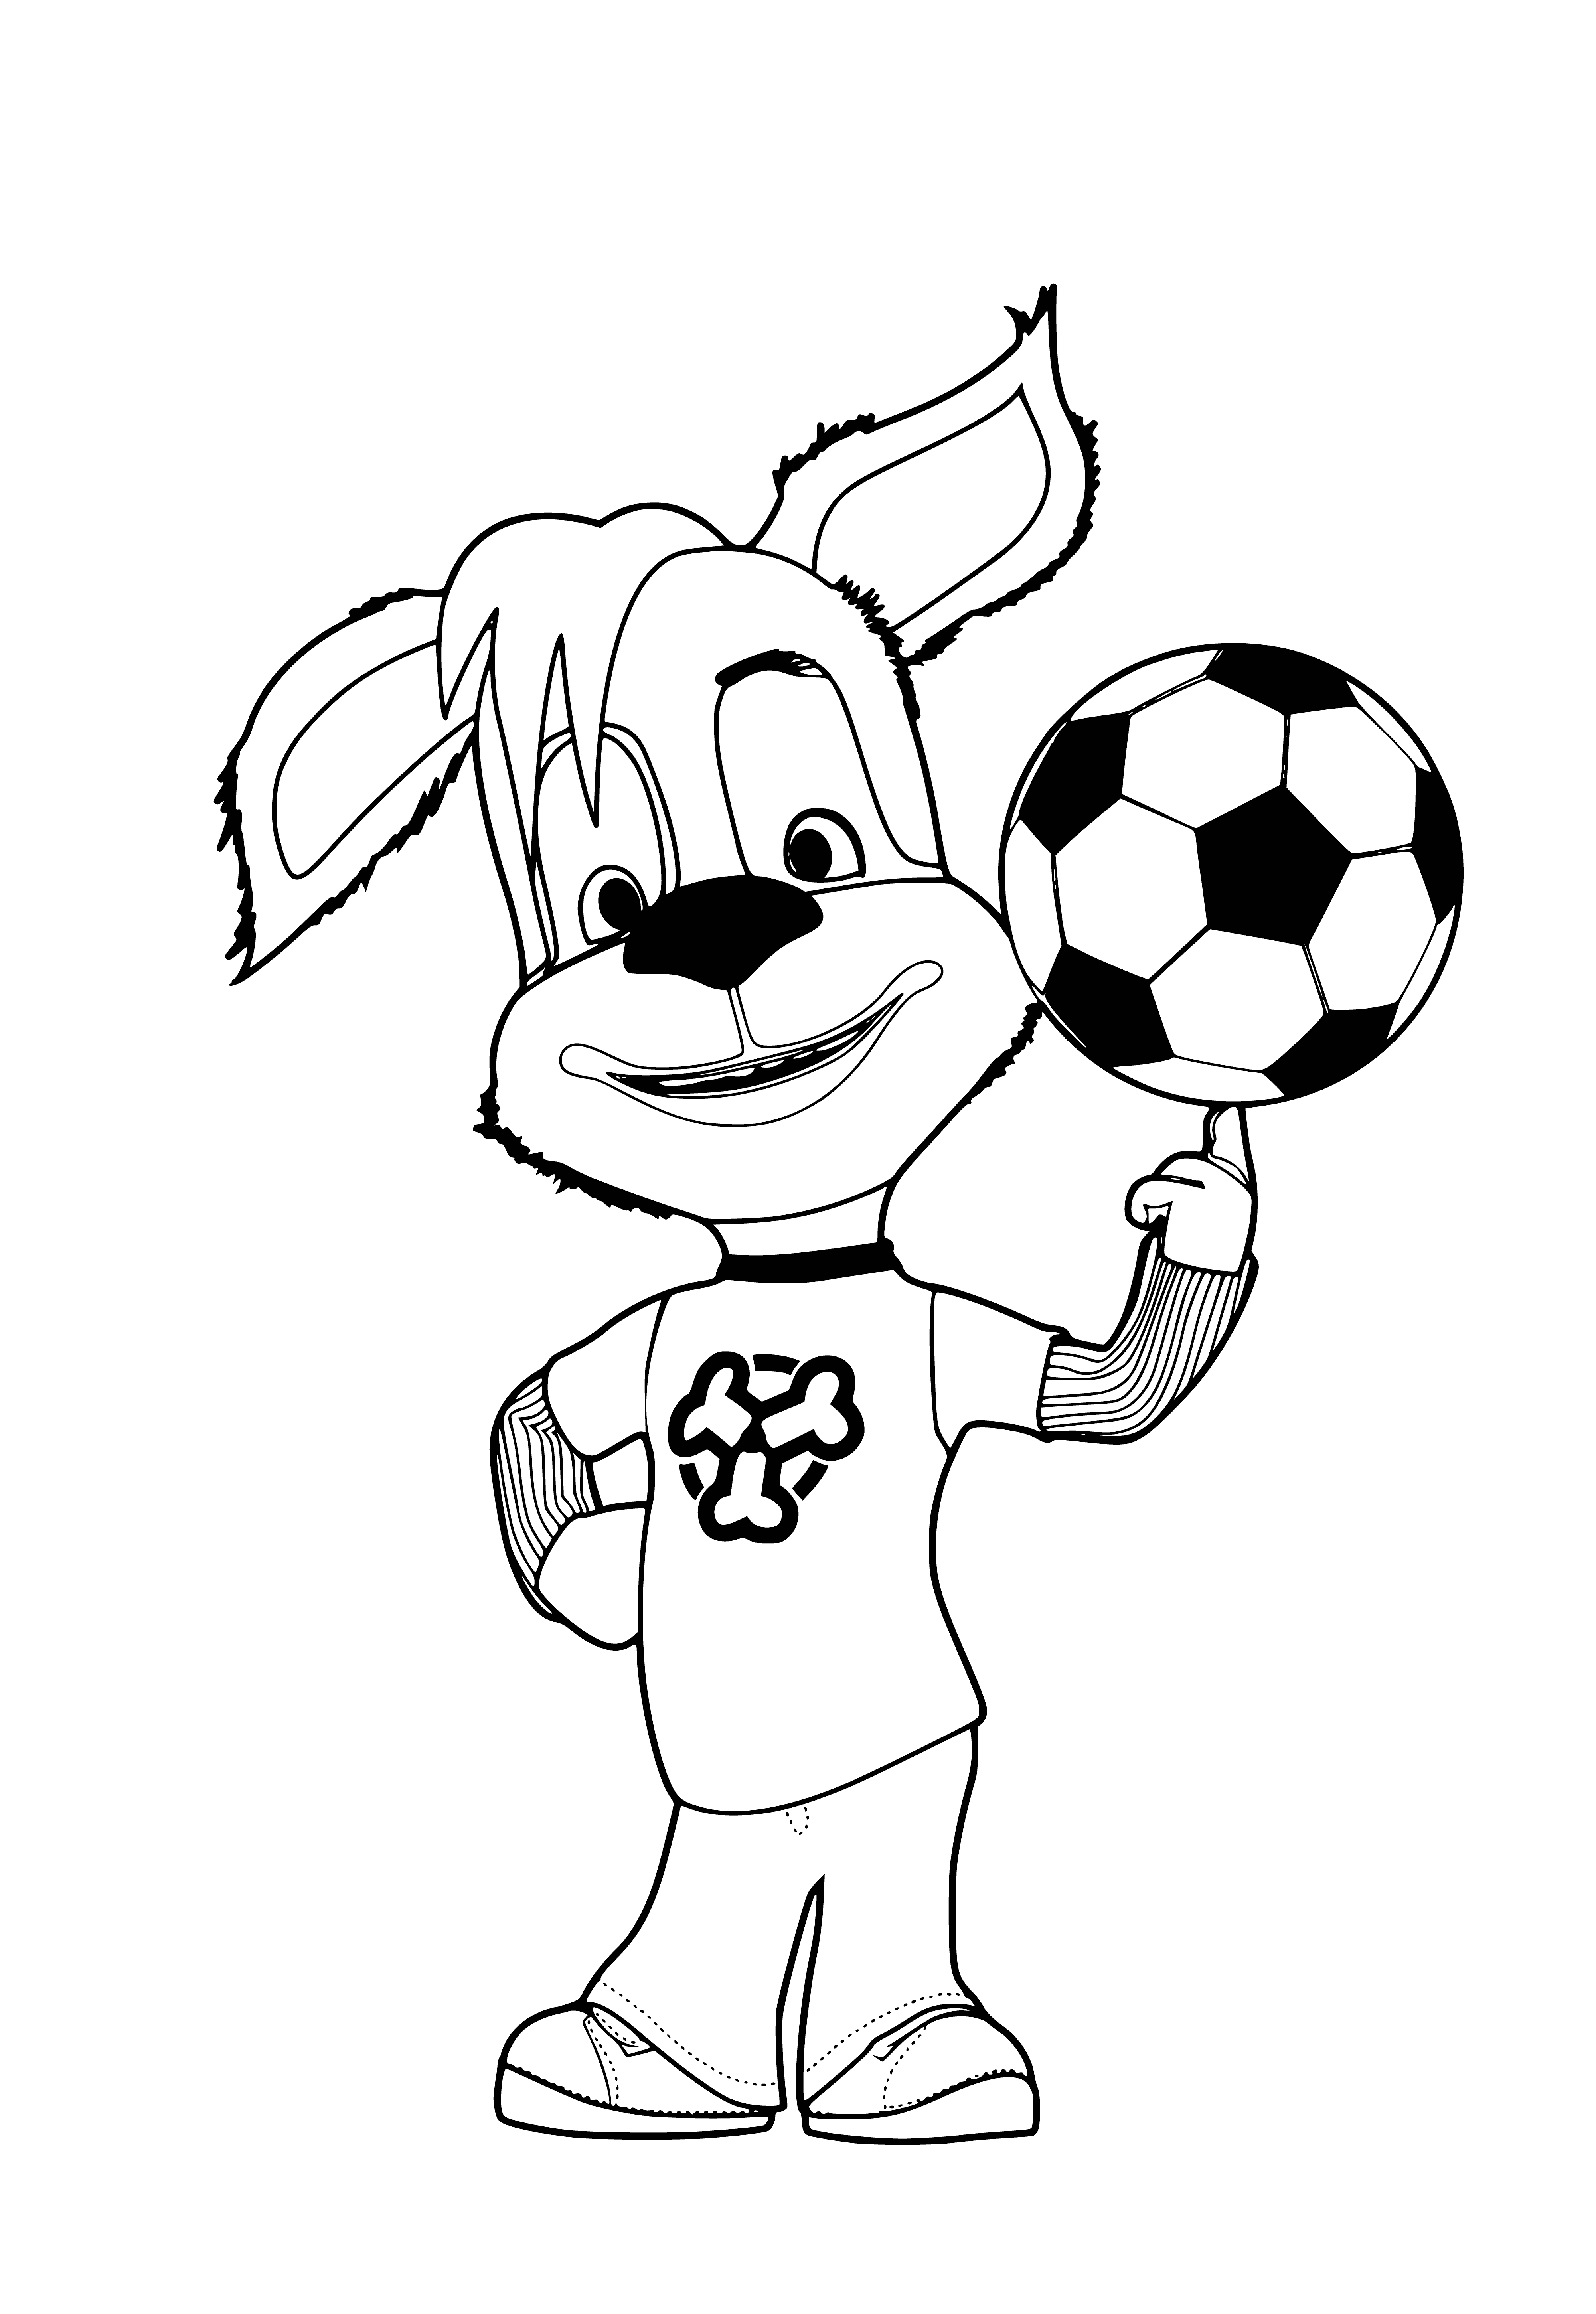 Ball buddy coloring page